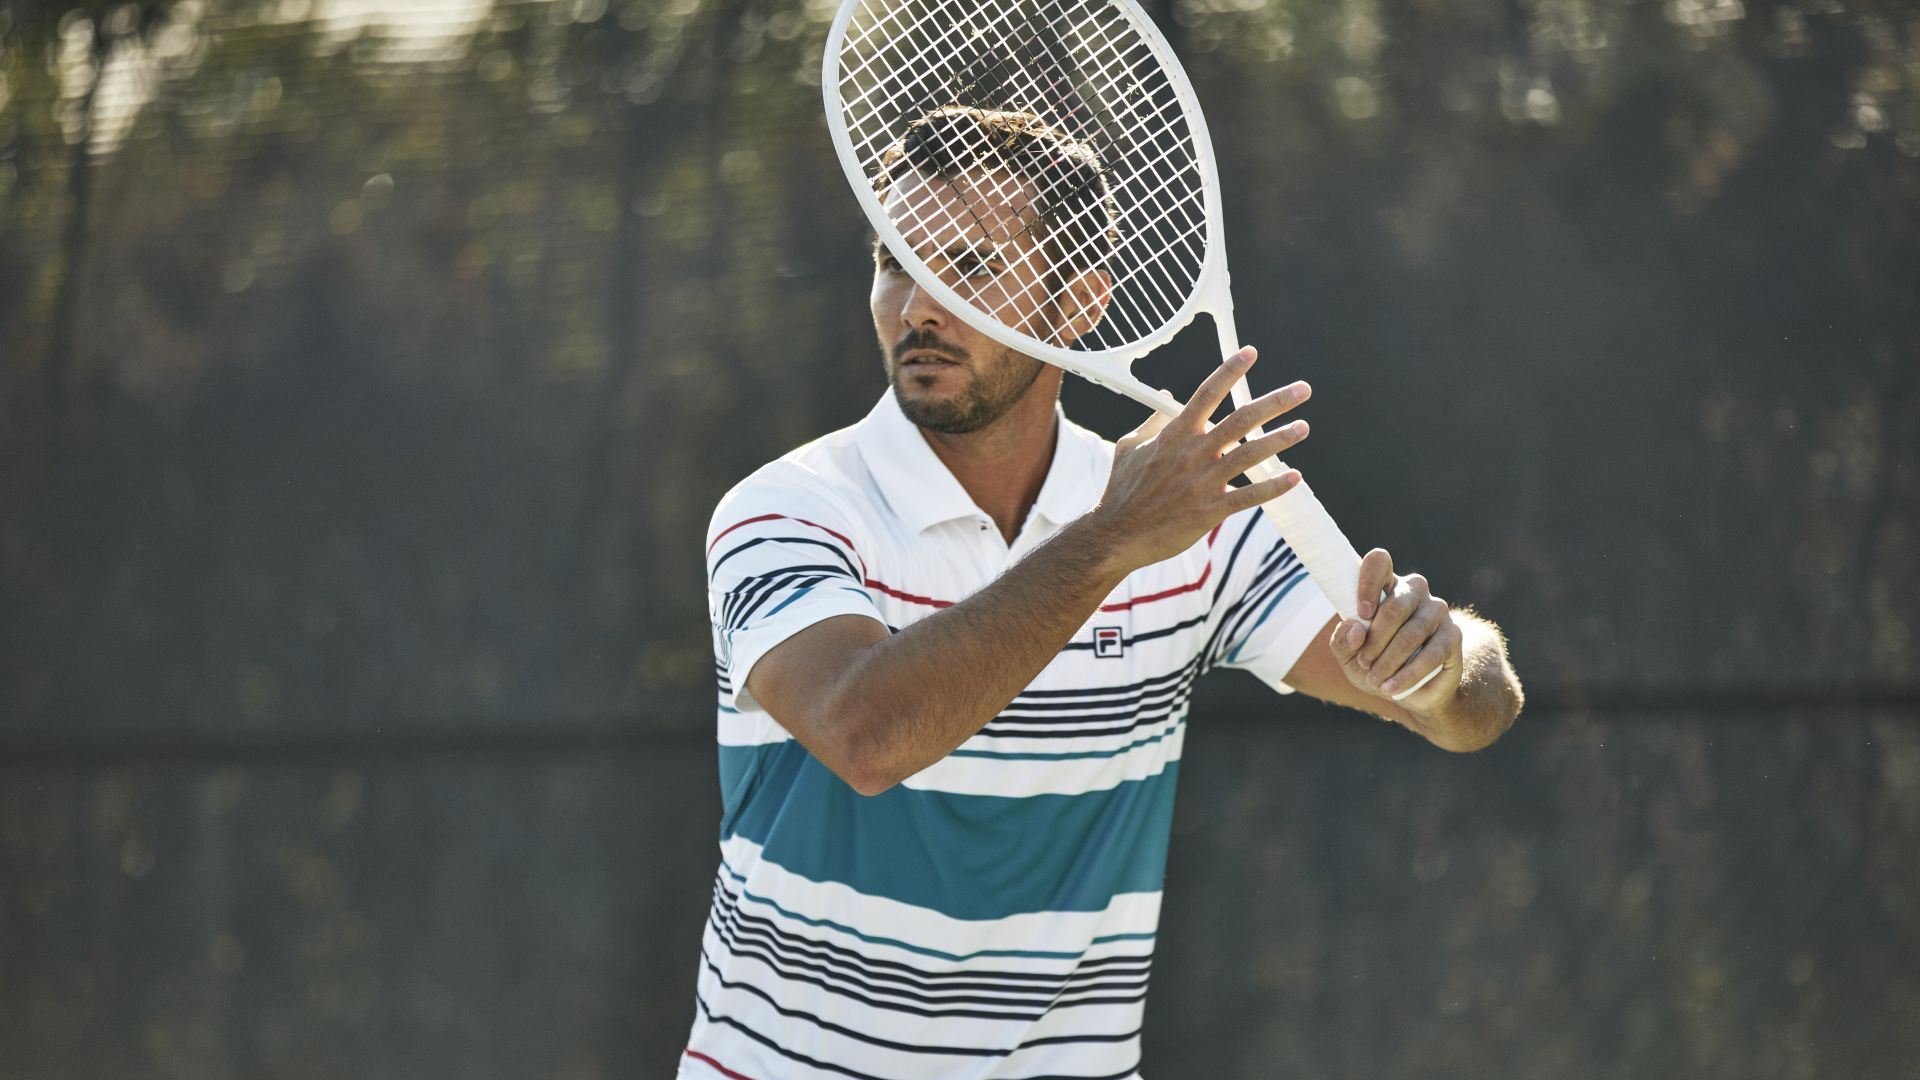 FILA Launches New Men's Heritage Tennis Collection